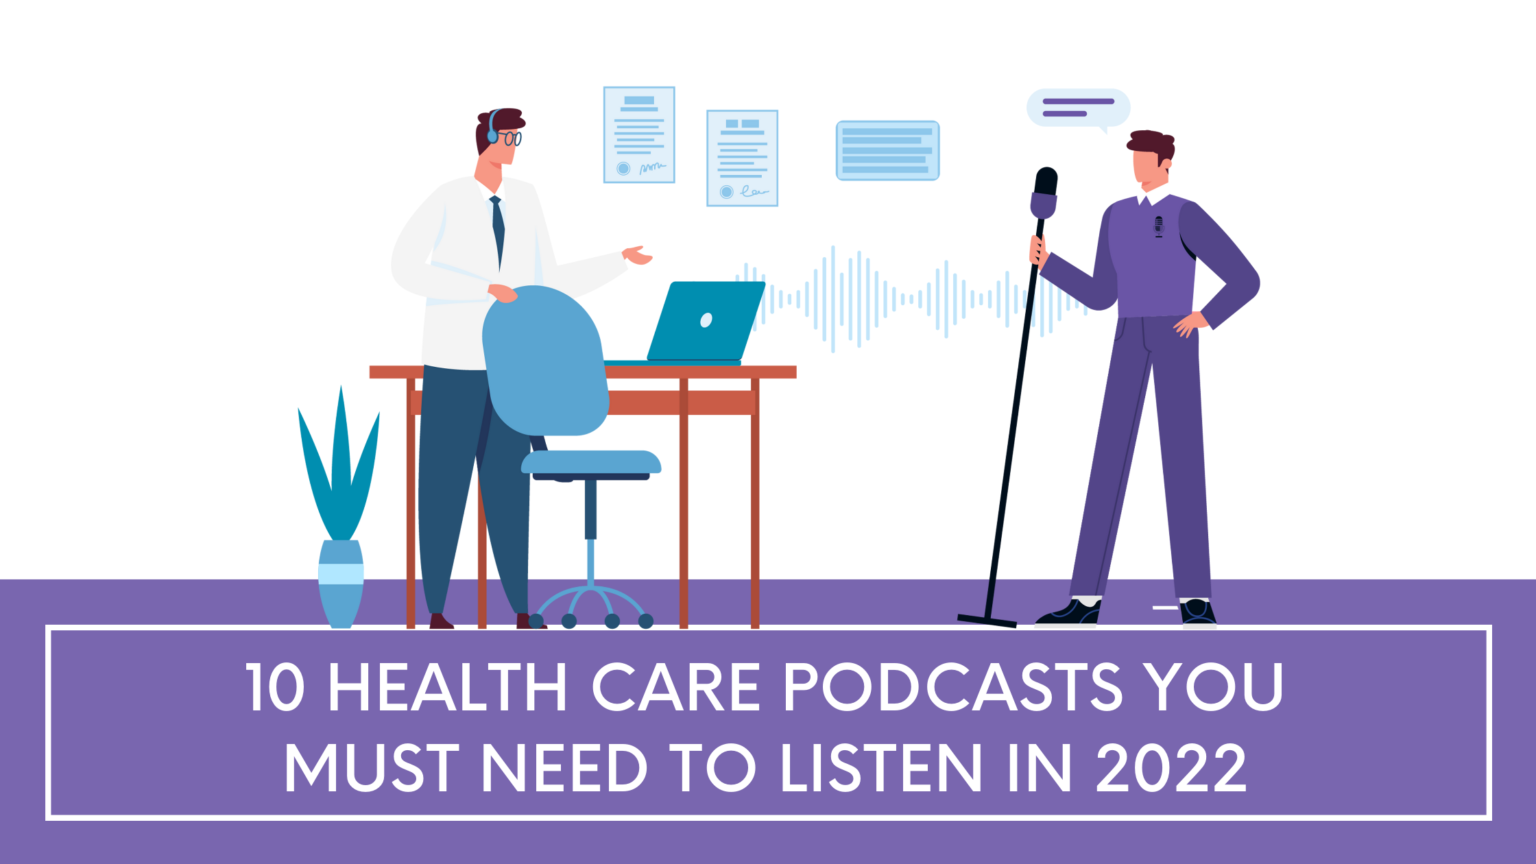 10 Healthcare Podcasts You Must Need to Listen in 2022